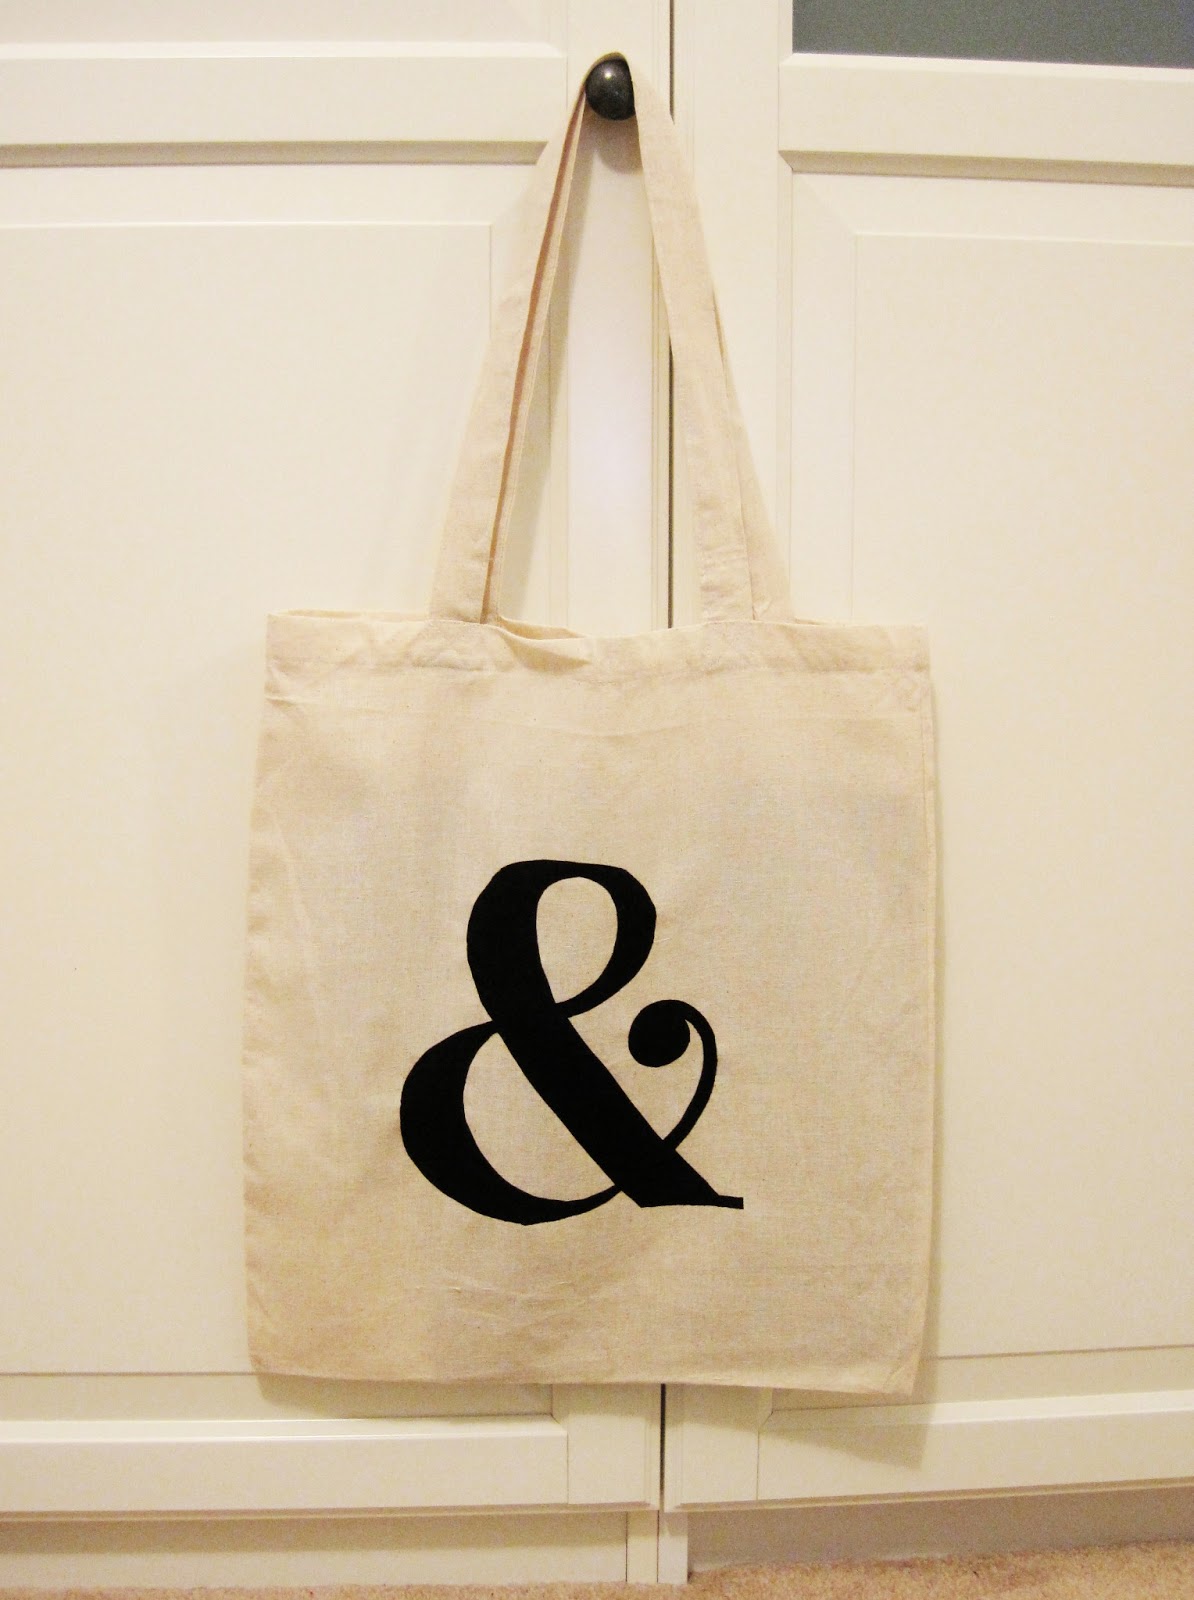 Scarlet Pyjamas: How to: Print your own tote bag